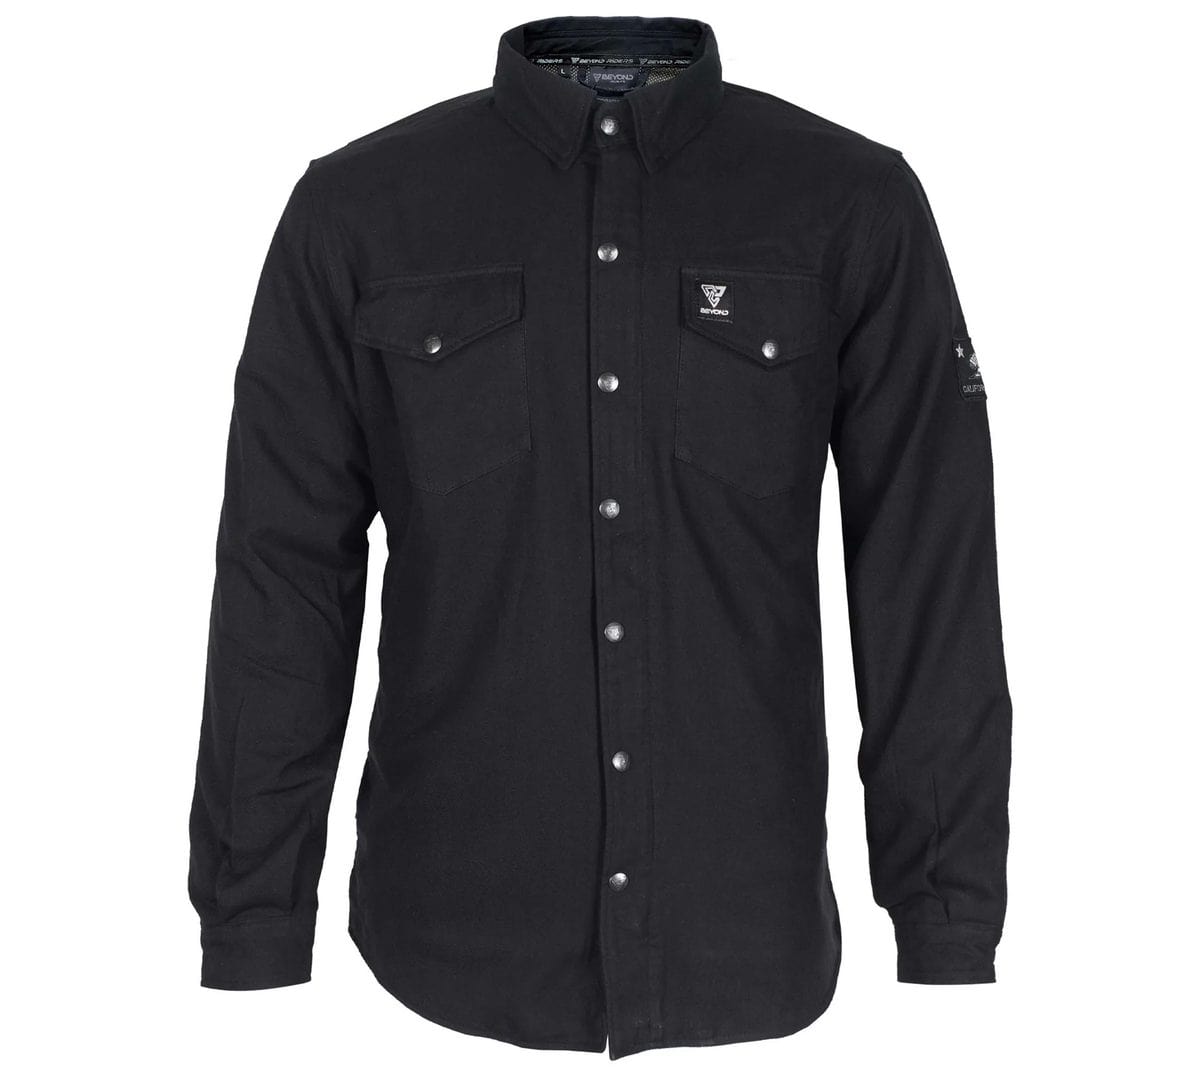 2022 Collection SALE Flannel Shirt - Black Solid with Pads